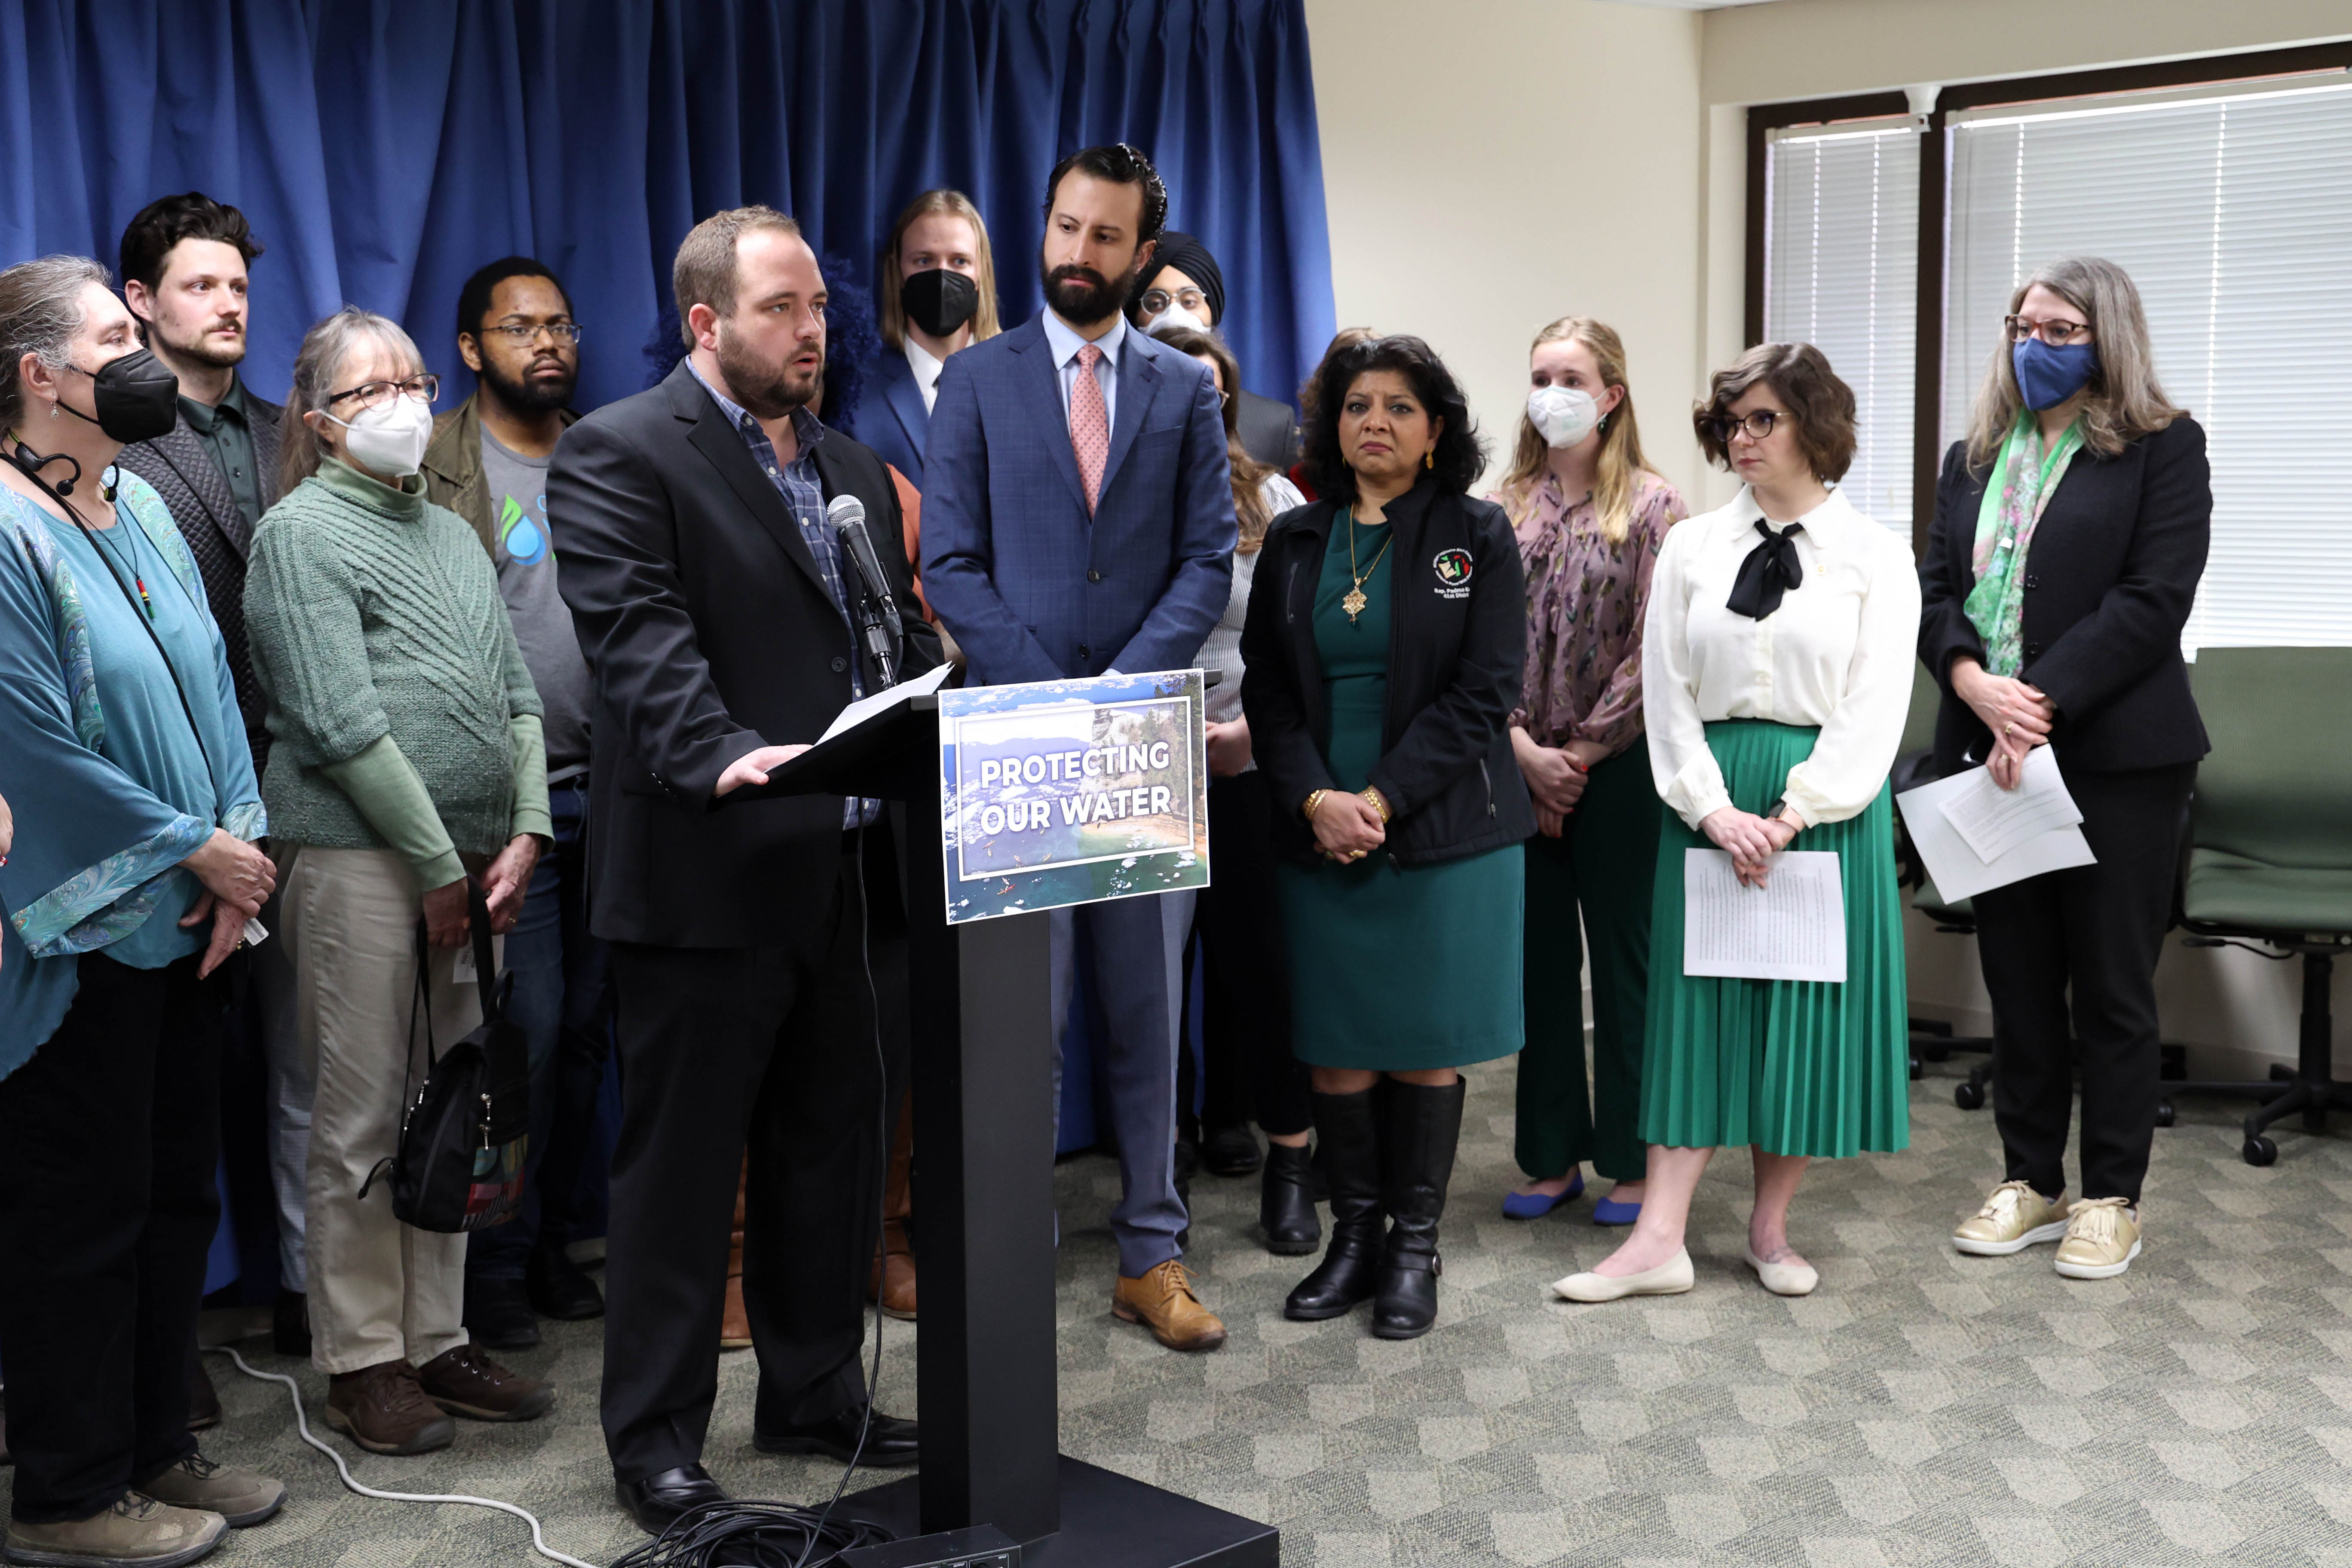 In March, Clean Water Action Legislative and Policy Director Sean McBrearty joined Michigan Representatives to speak about the public trust bill package.